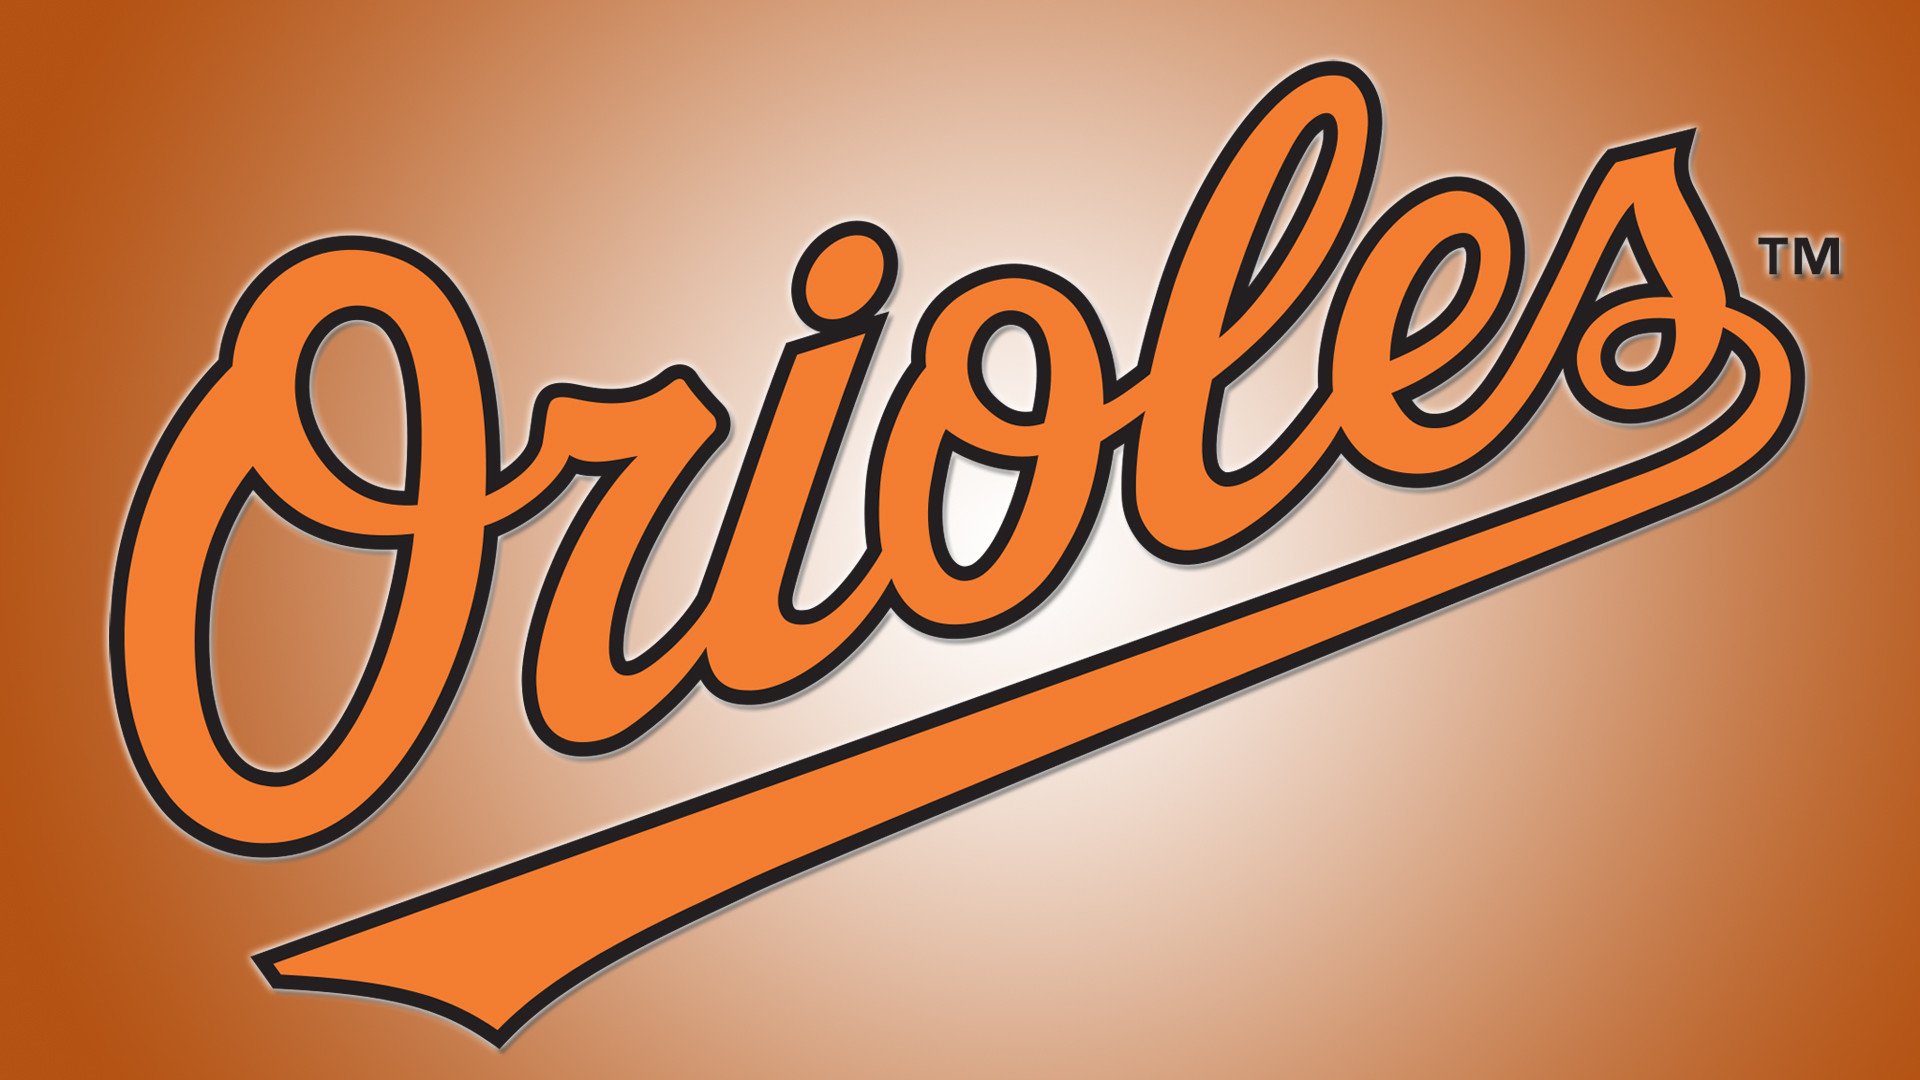 Baltimore Orioles Wallpapers, Browser Themes More